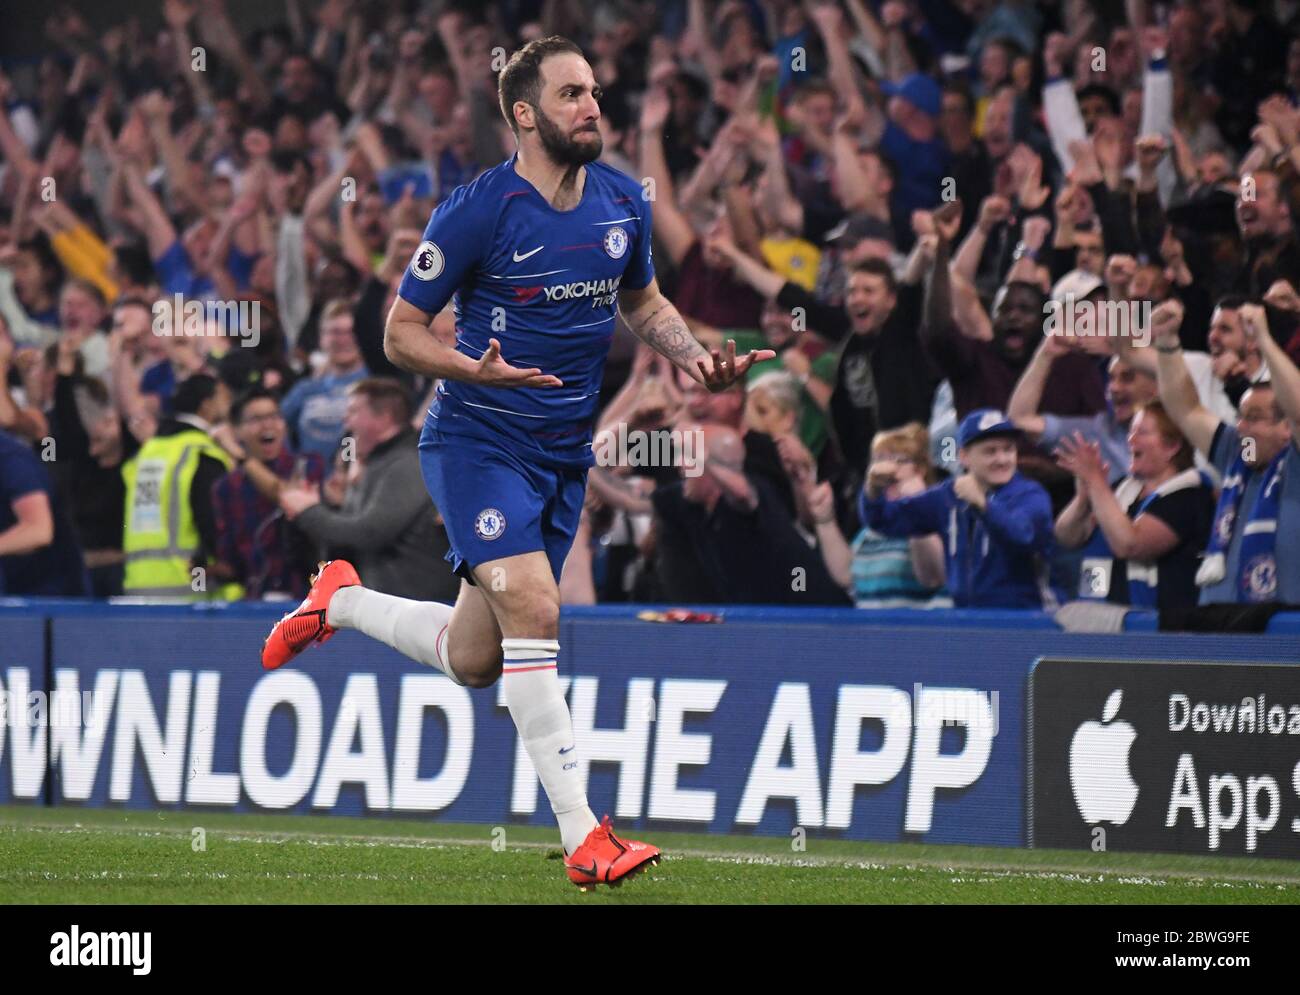 LONDON, ENGLAND - APRIL 22, 2019: Gonzalo Higuain of Chelsea celebrates after he scored a goal during the 2018/19 Premier League game between Chelsea Stock Photo